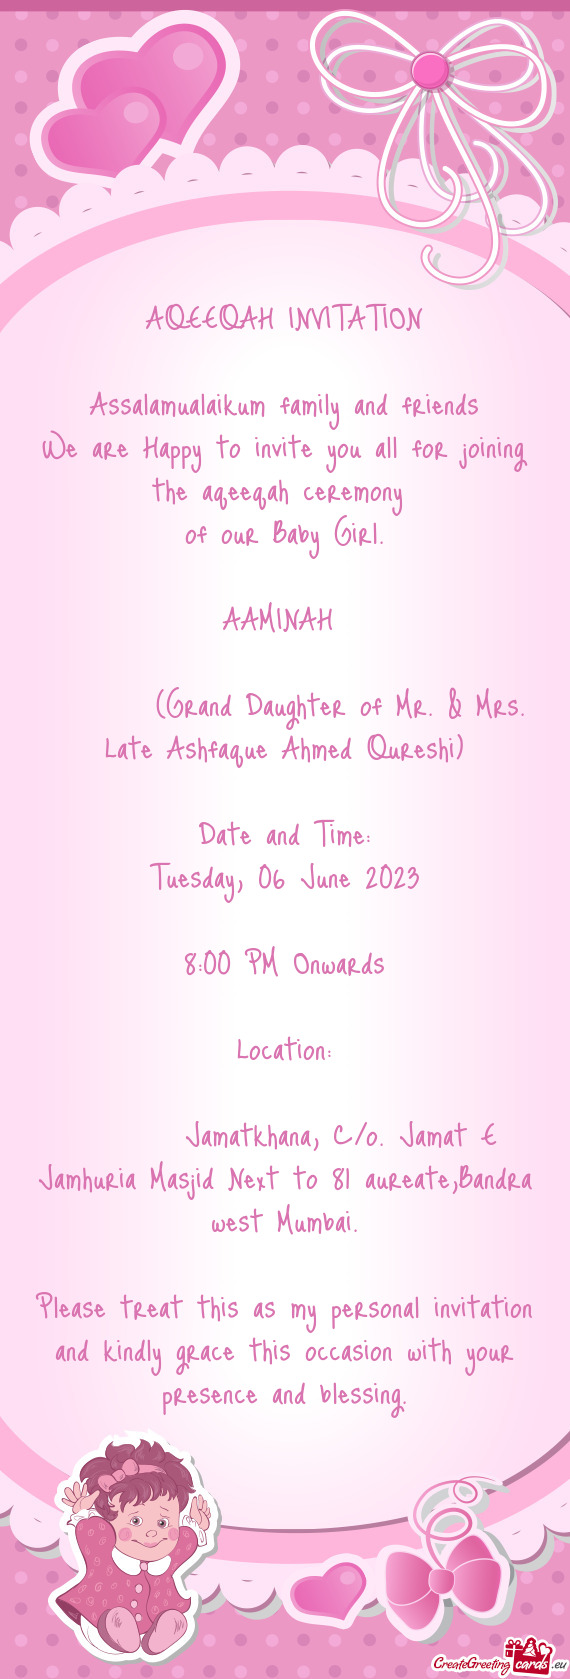 (Grand Daughter of Mr. & Mrs. Late Ashfaque Ahmed Qureshi)